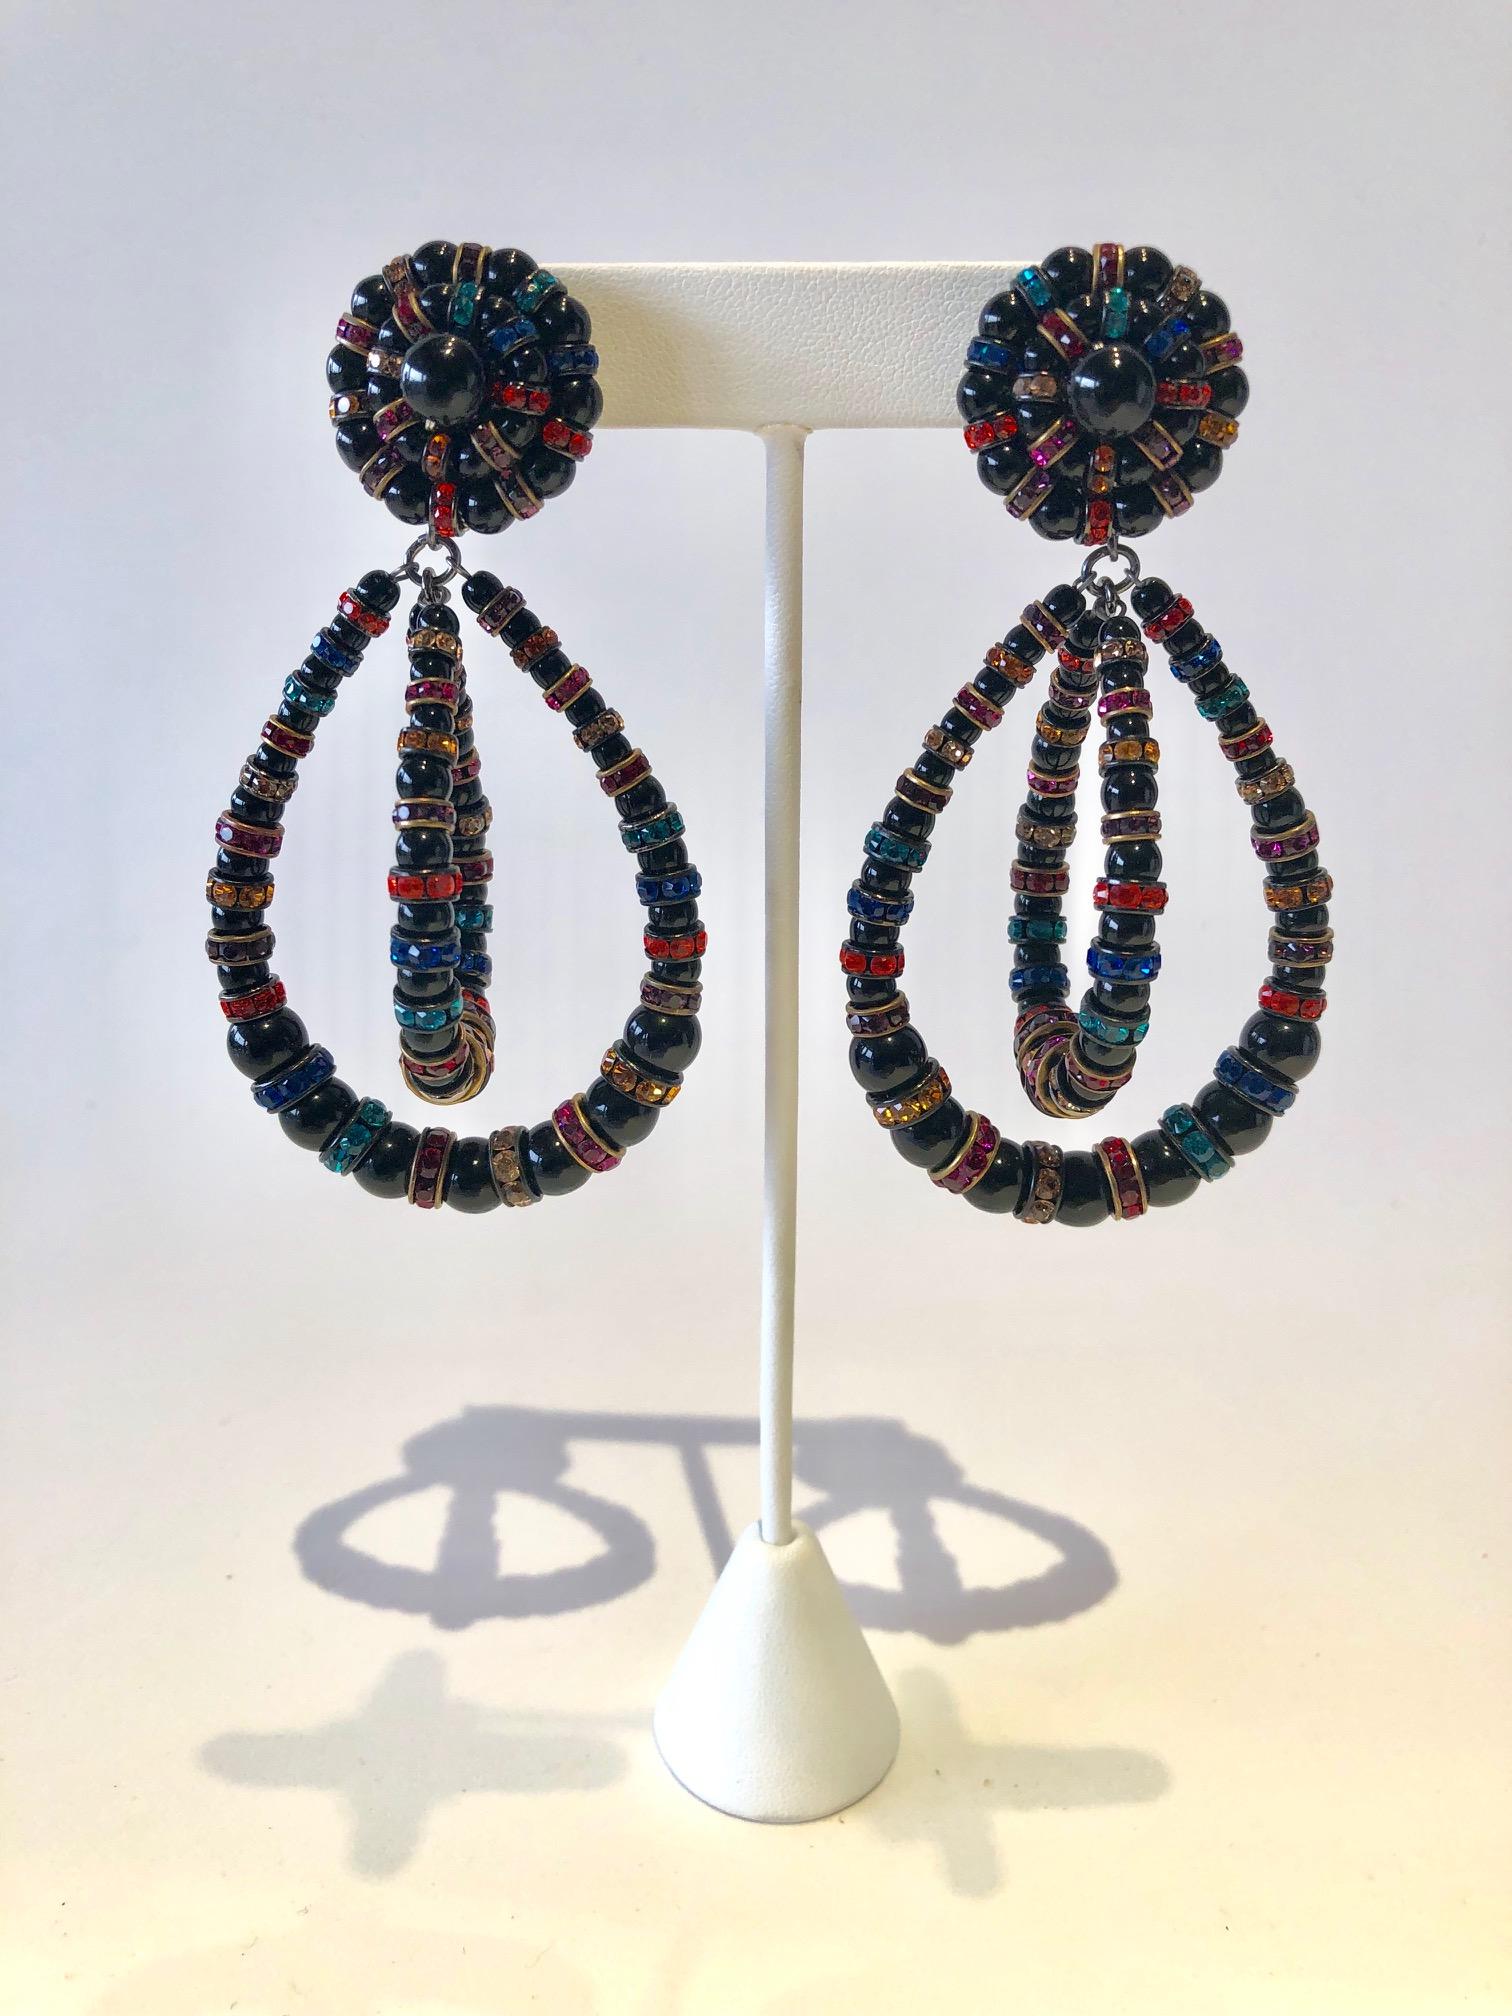 French designer architectural statement clip-on earrings made in Paris by Francoise Montague - the earrings feature jet black glass beads which are accented by a plethora of multi-colored rondels in hues of blue, red, orange and green. What's